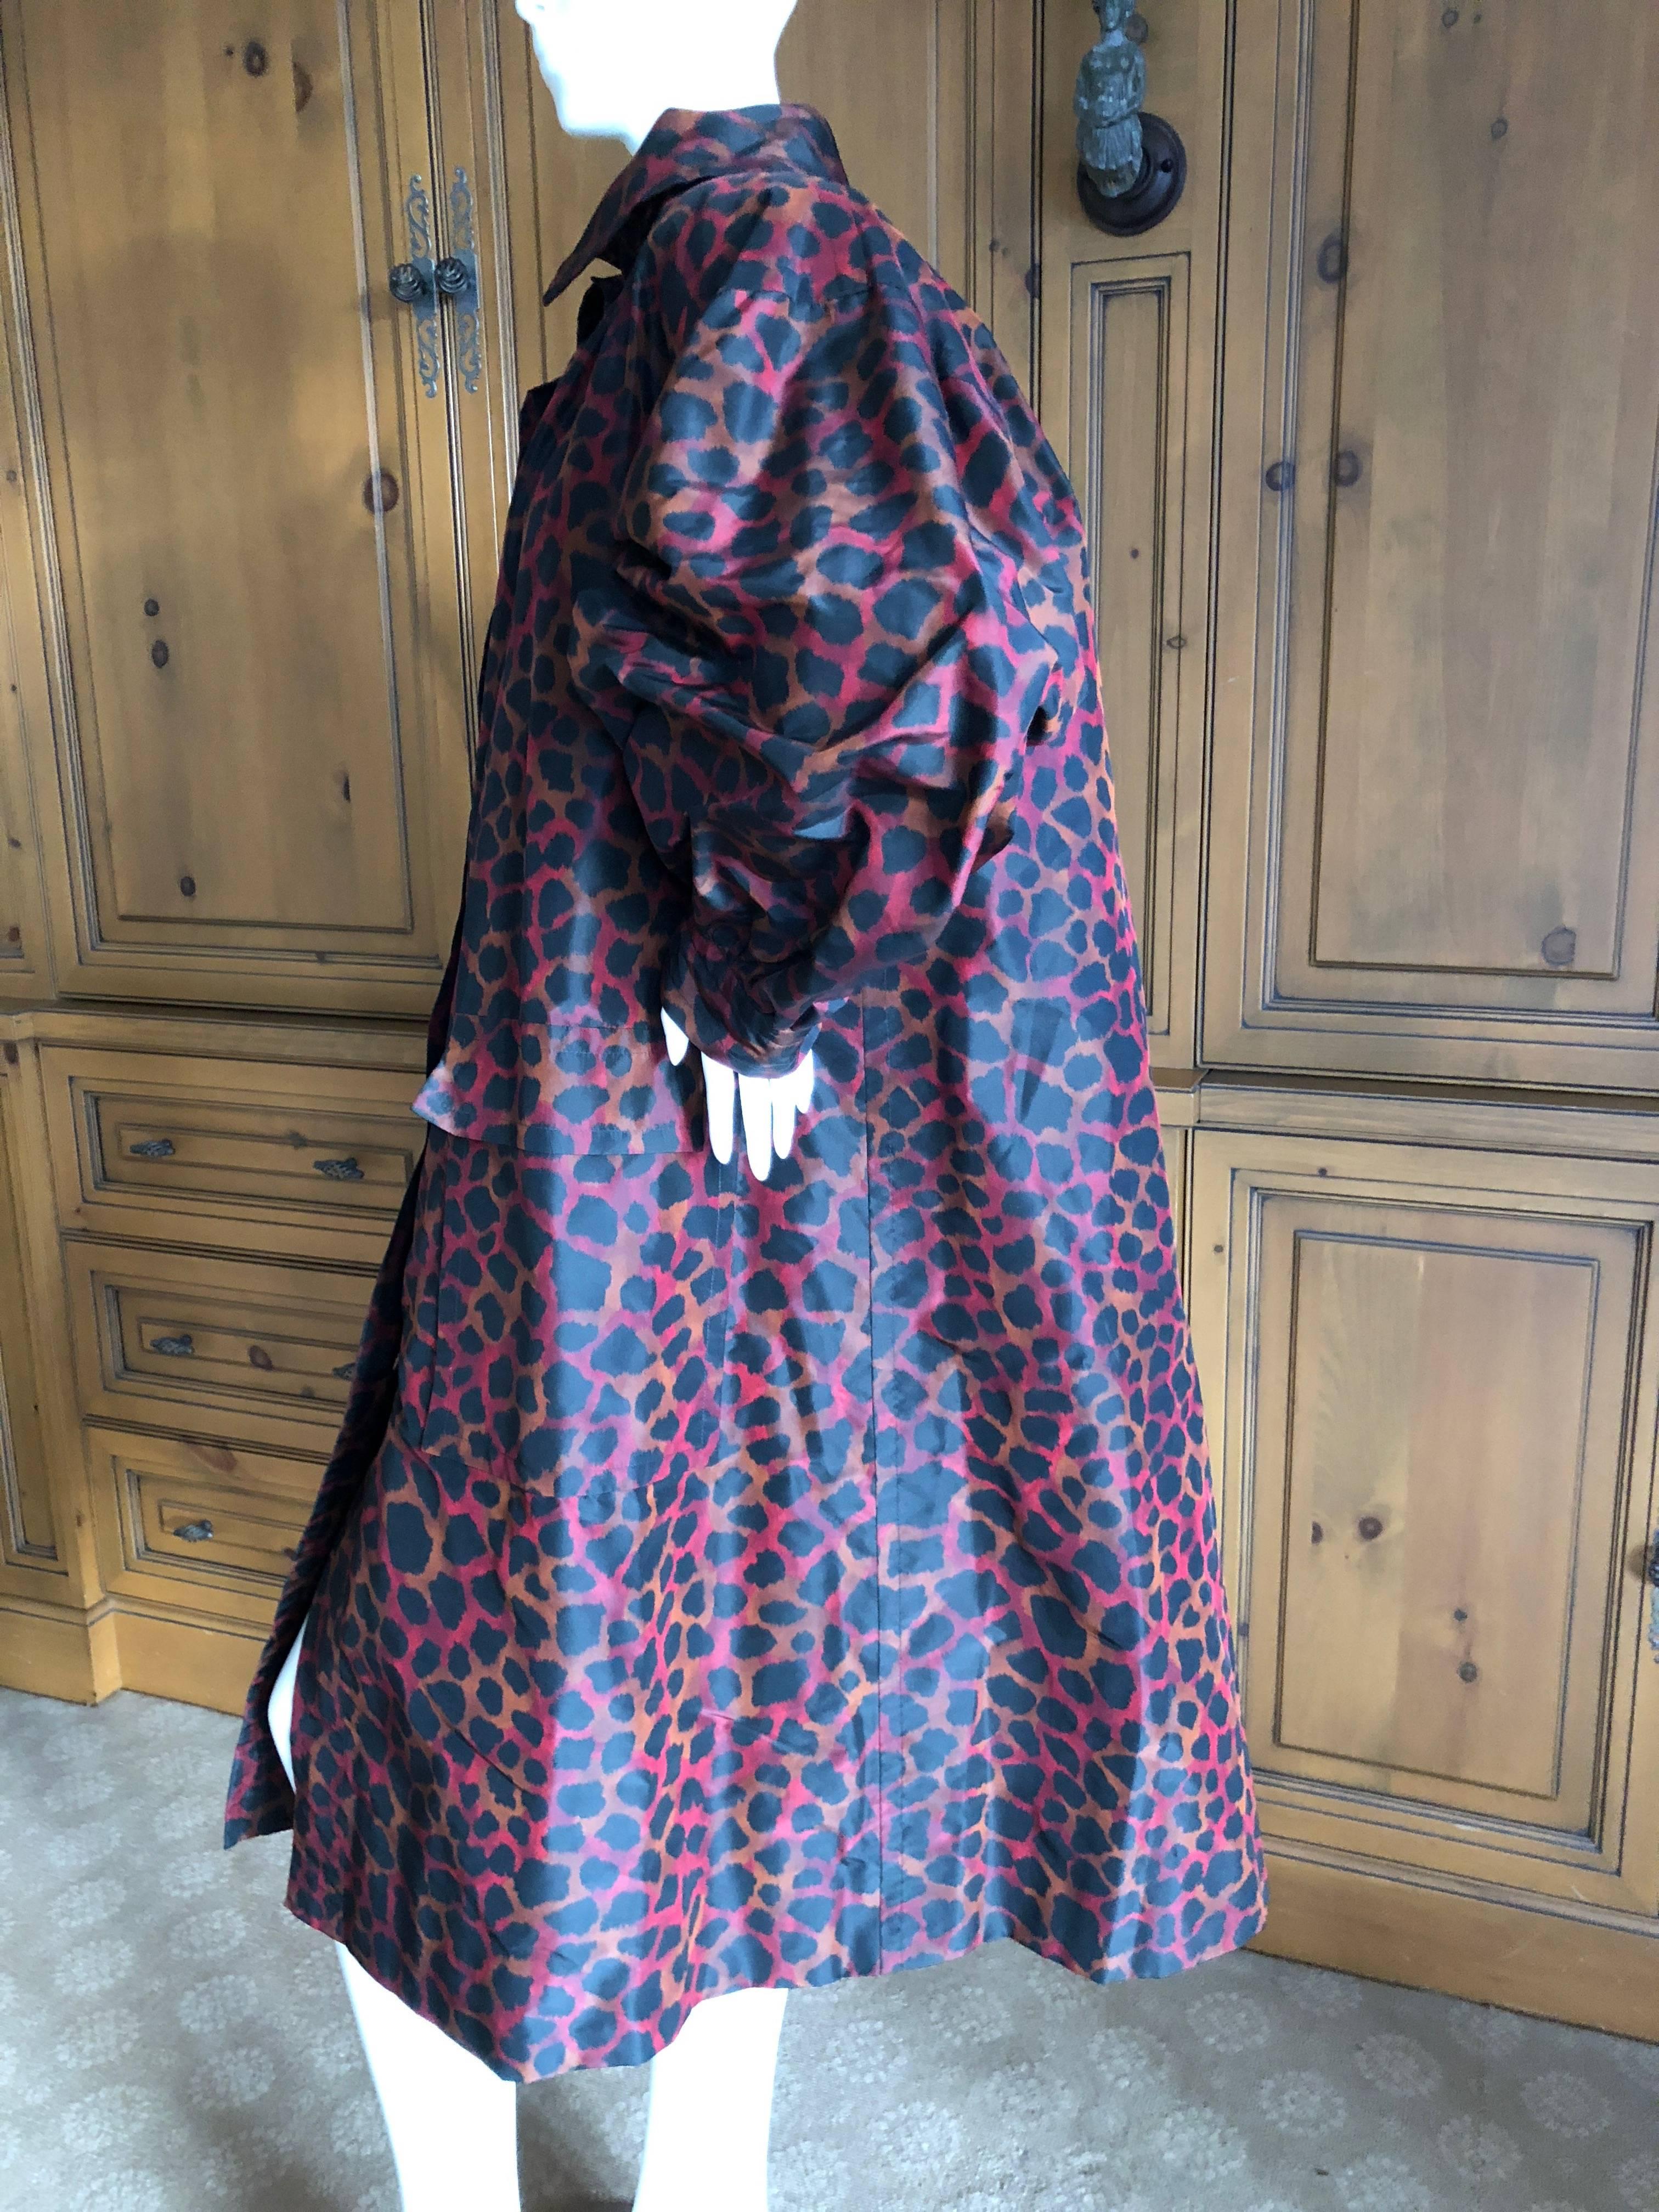 Yves Saint Laurent Numbered Haute Couture Silk Taffeta Leopard Print Swing Coat In Excellent Condition For Sale In Cloverdale, CA